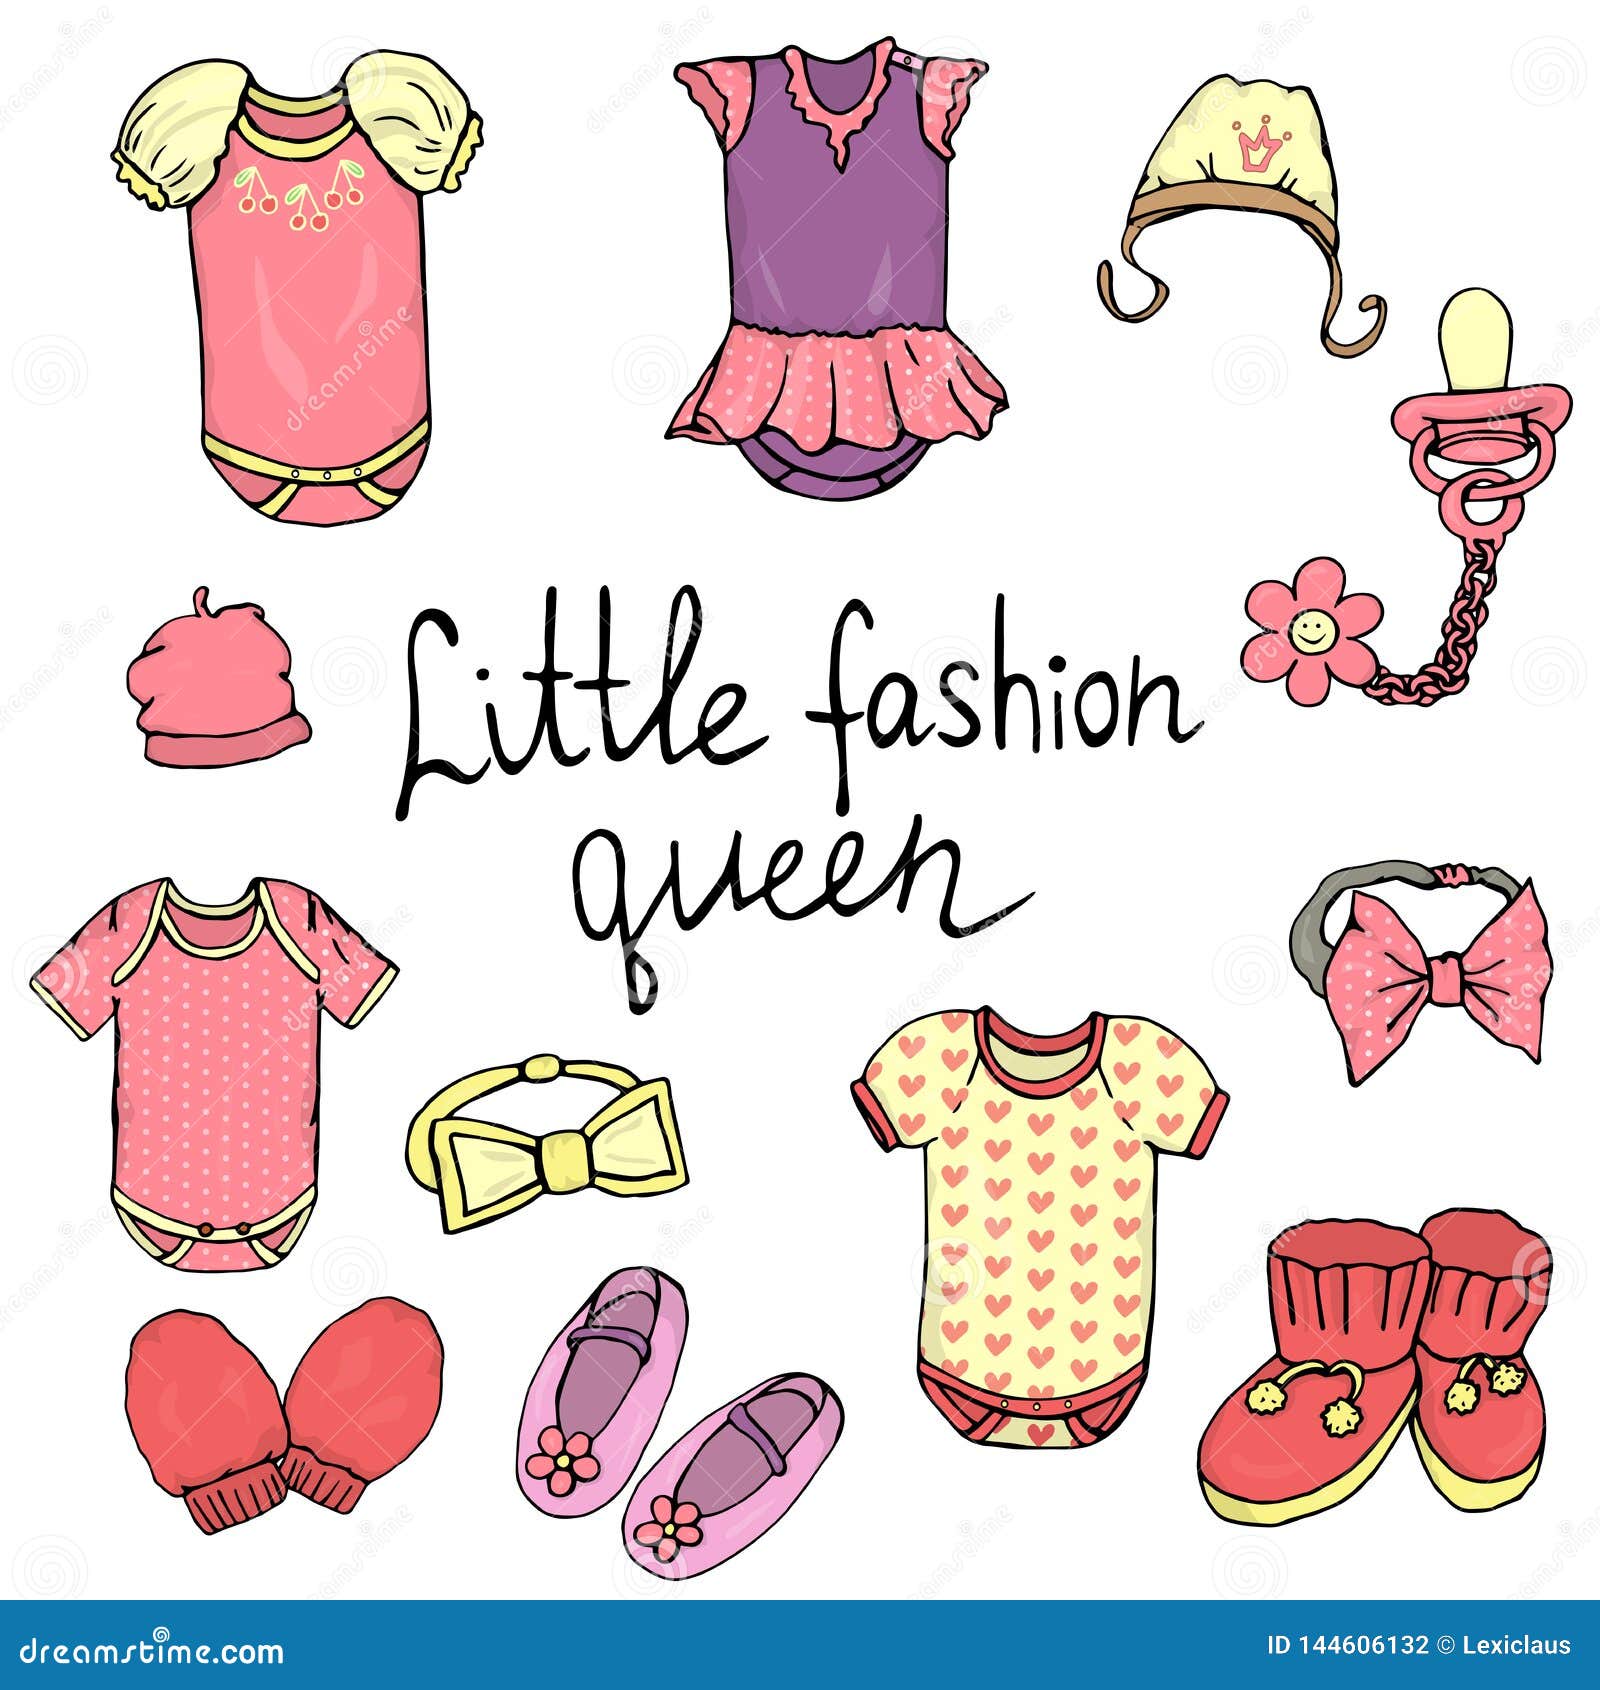 Download Vector Illustration Of Baby Clothes Stock Vector ...